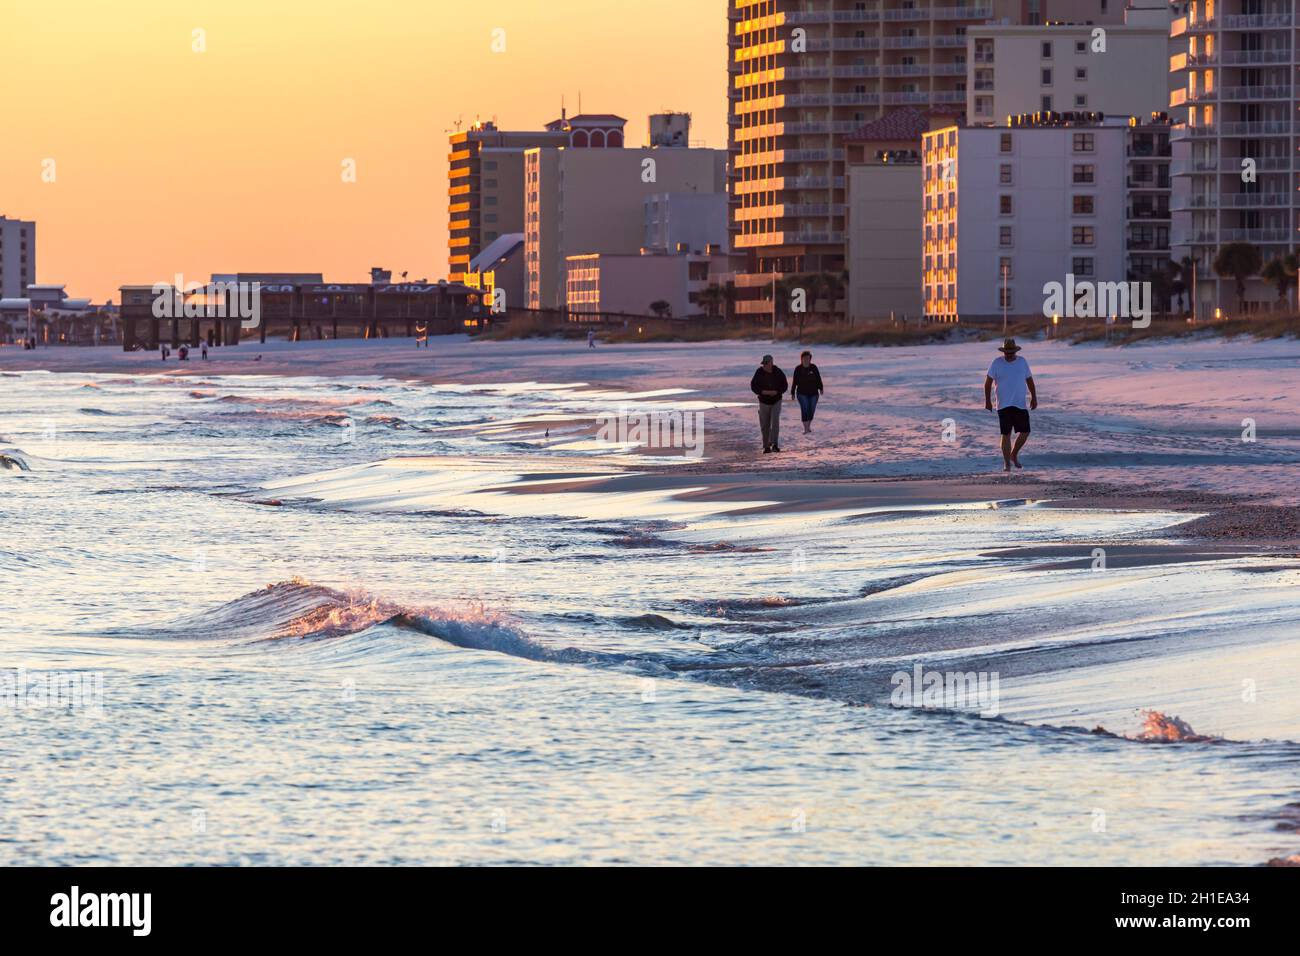 People out for an evening walk on the beach in front of hotels and condominiums near sunset in Gulf Shores, Alabama Stock Photo